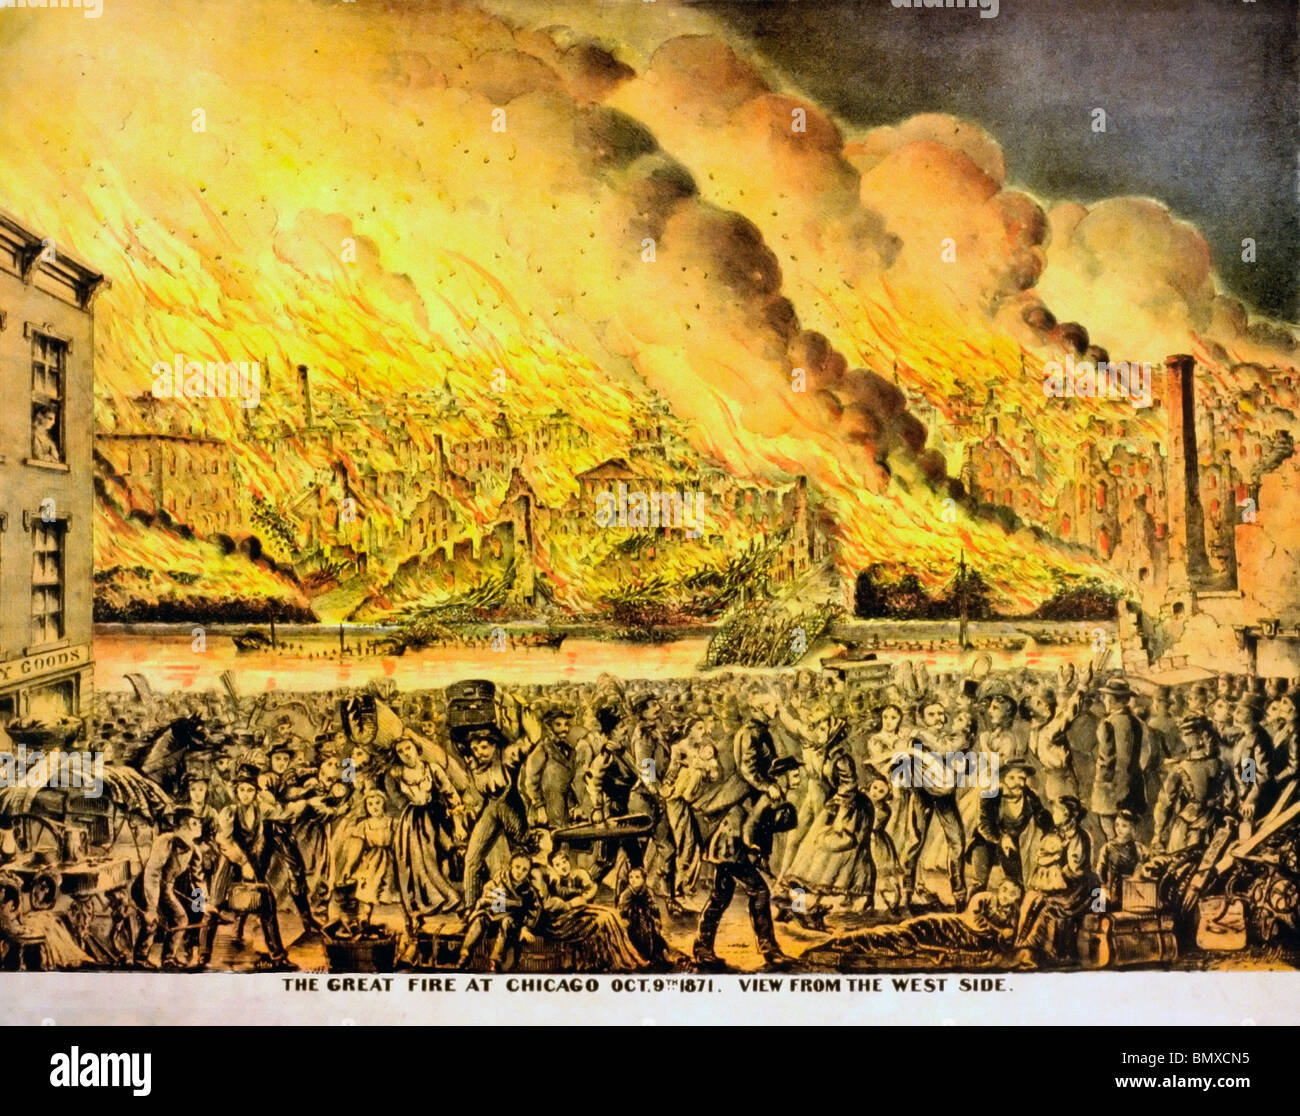 The Great fire at Chicago October 9th 1871. View from the west side Stock Photo